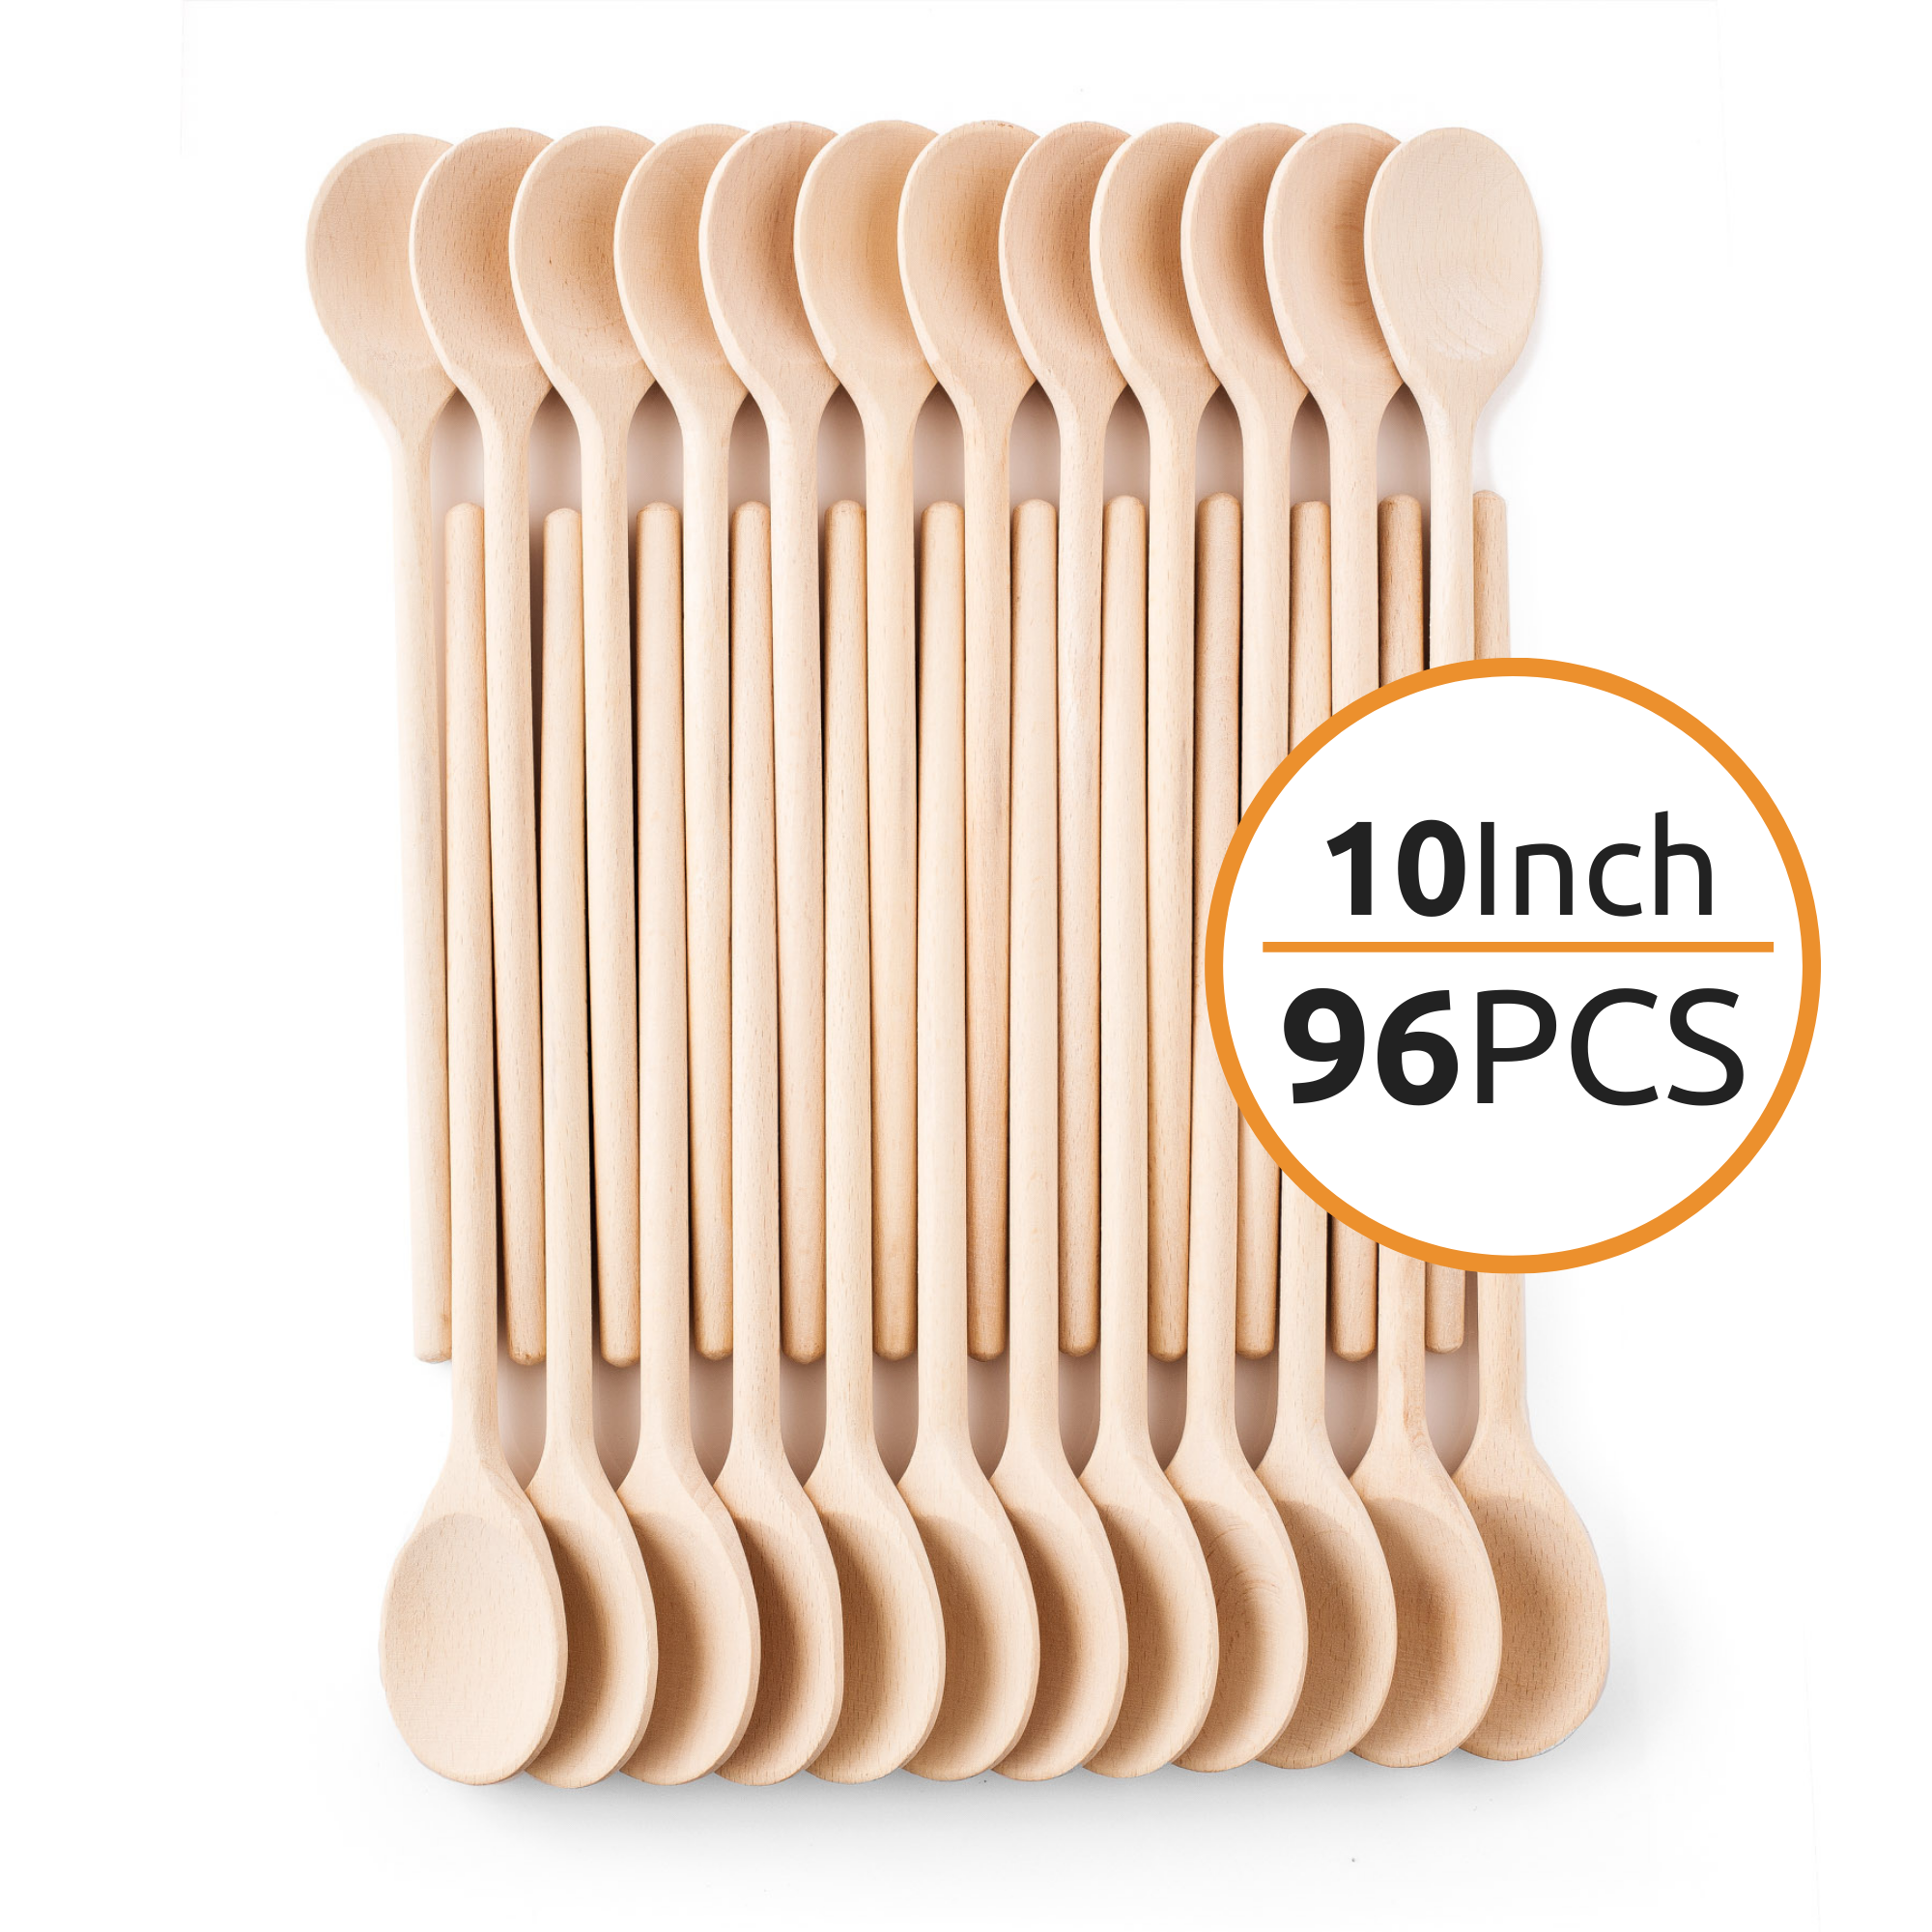 Mr. Woodware - Craft Wooden Spoons Bulk – 10 Inch – Set of 96